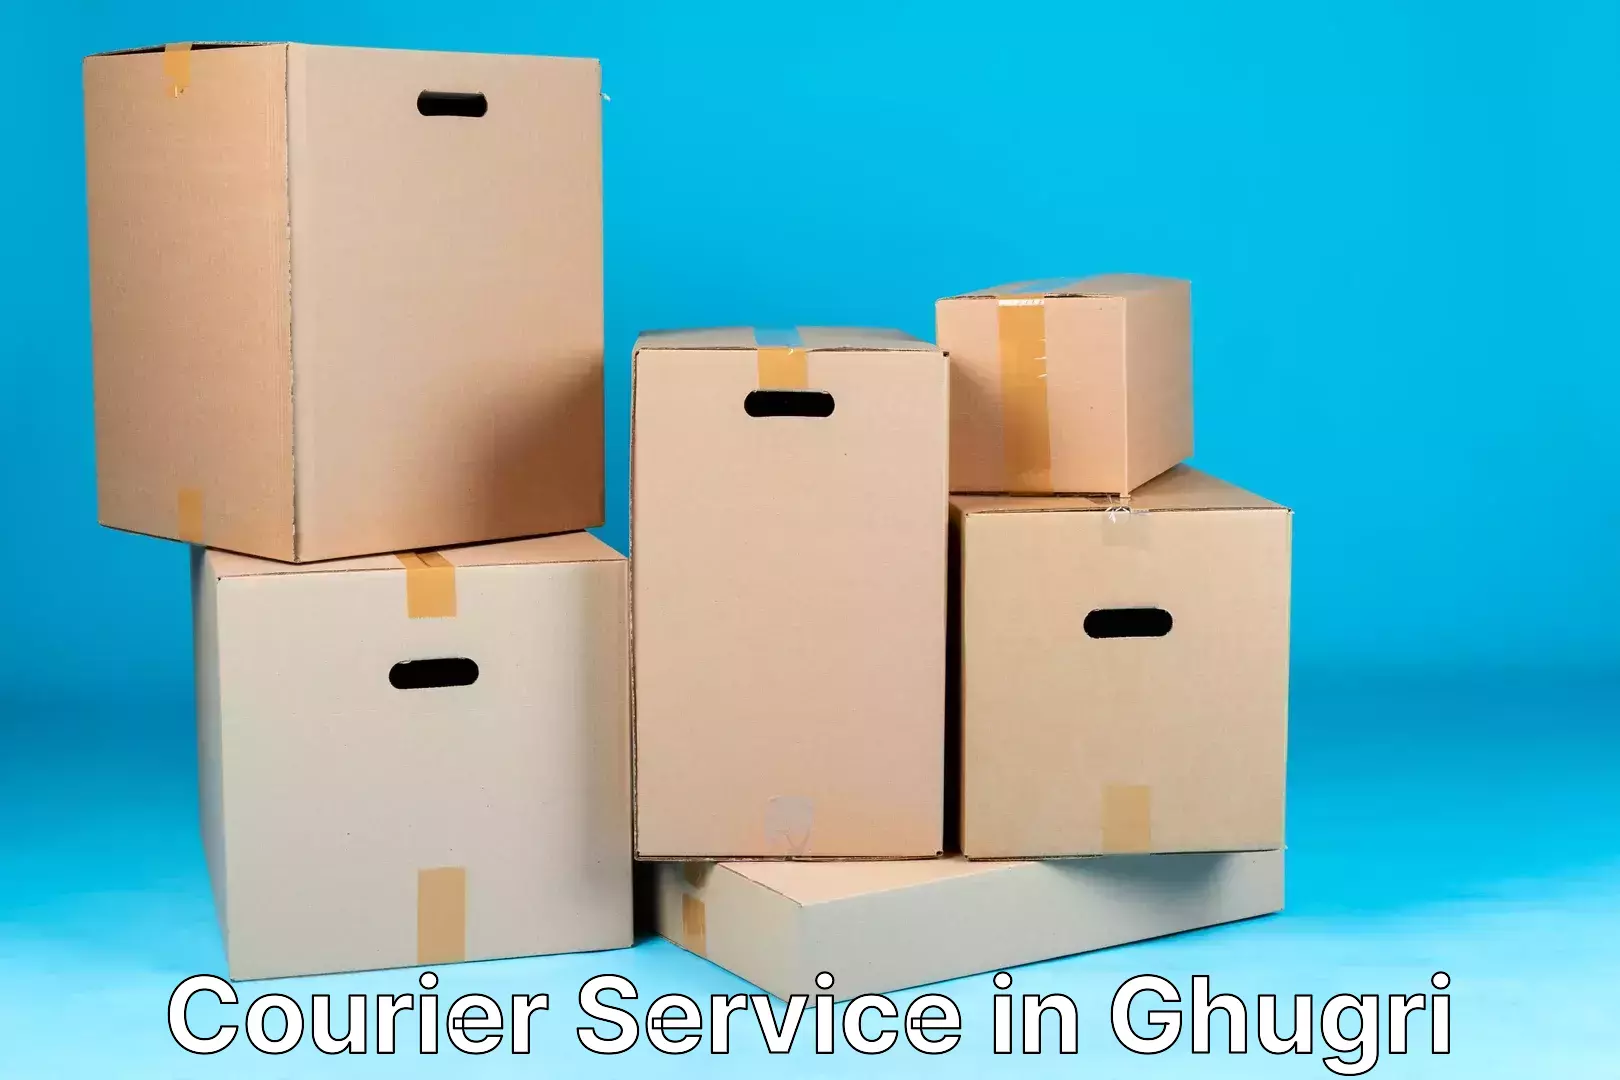 Courier dispatch services in Ghugri